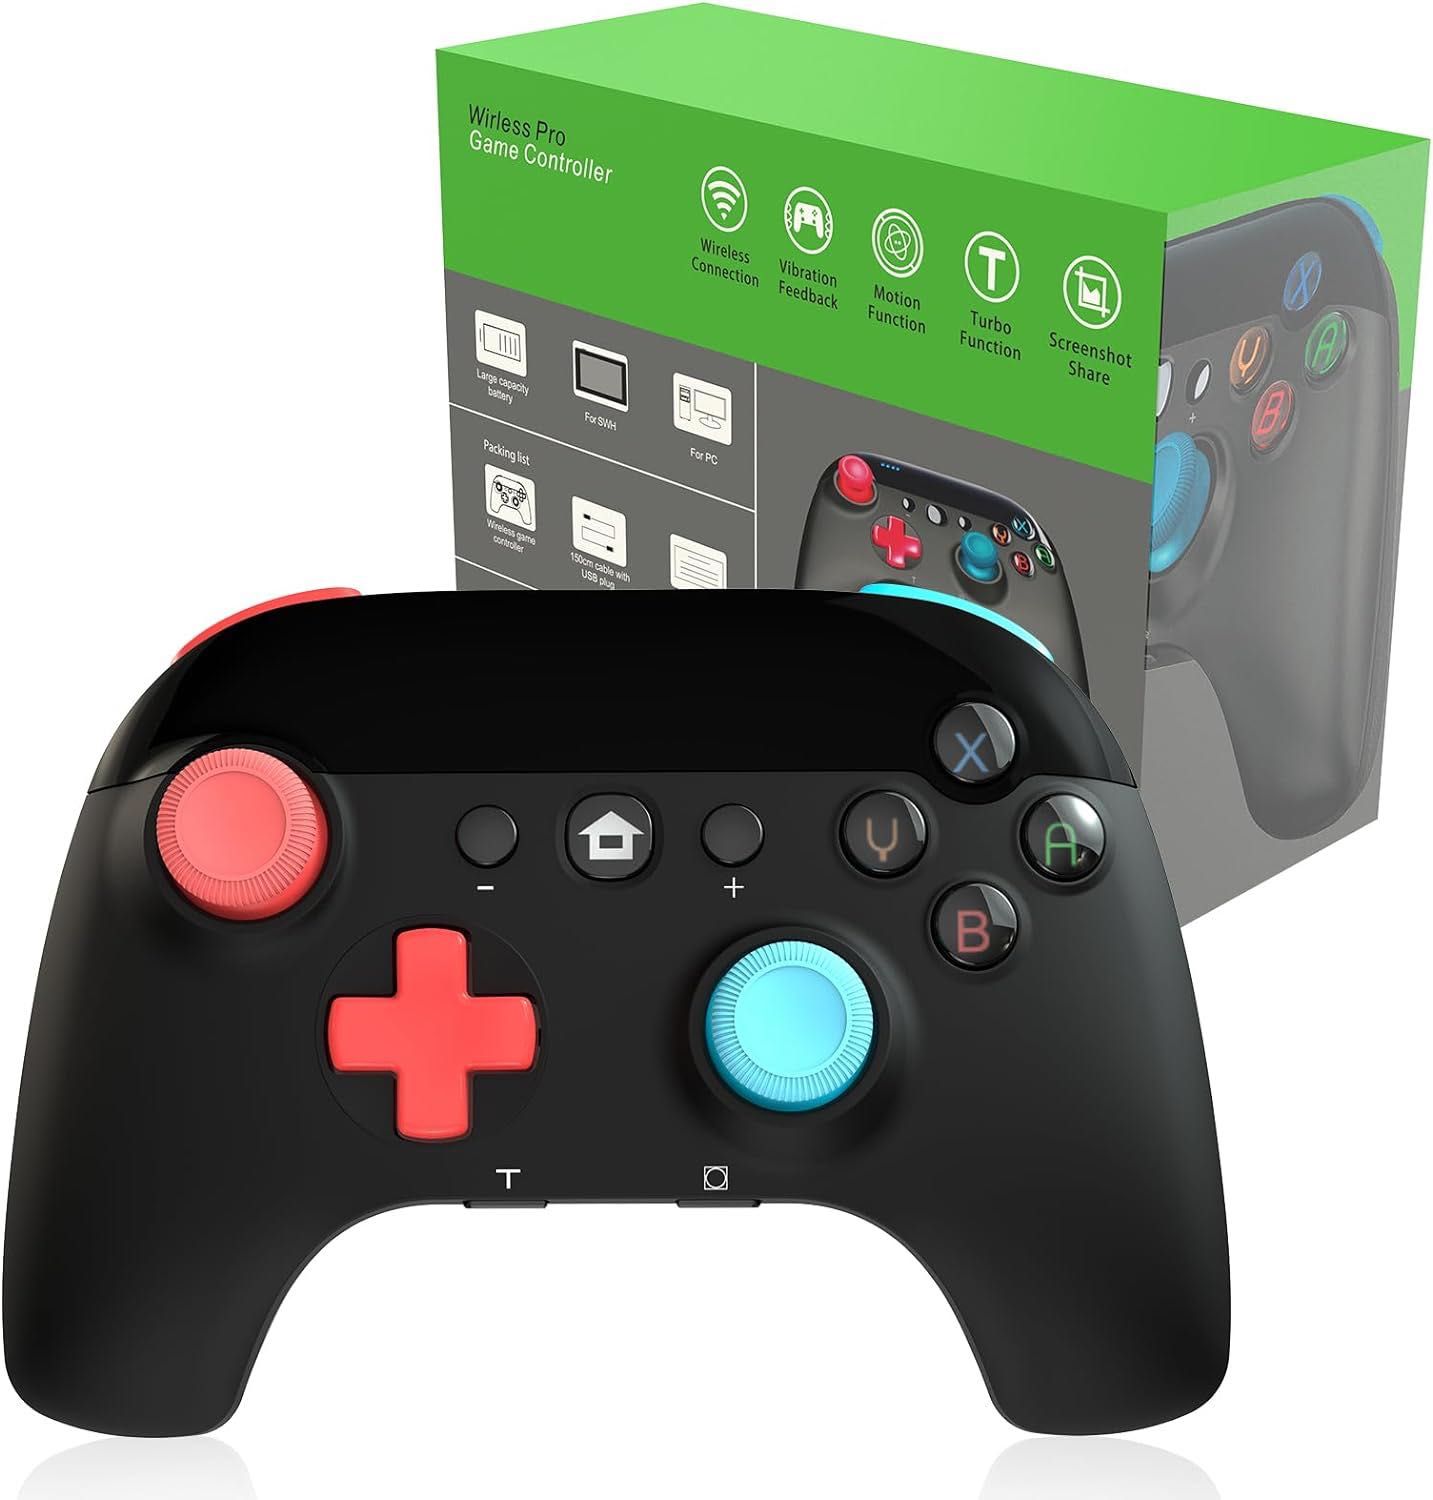 Beexcellent Wireless Pro game controller for Switch, джойстик Nintendo